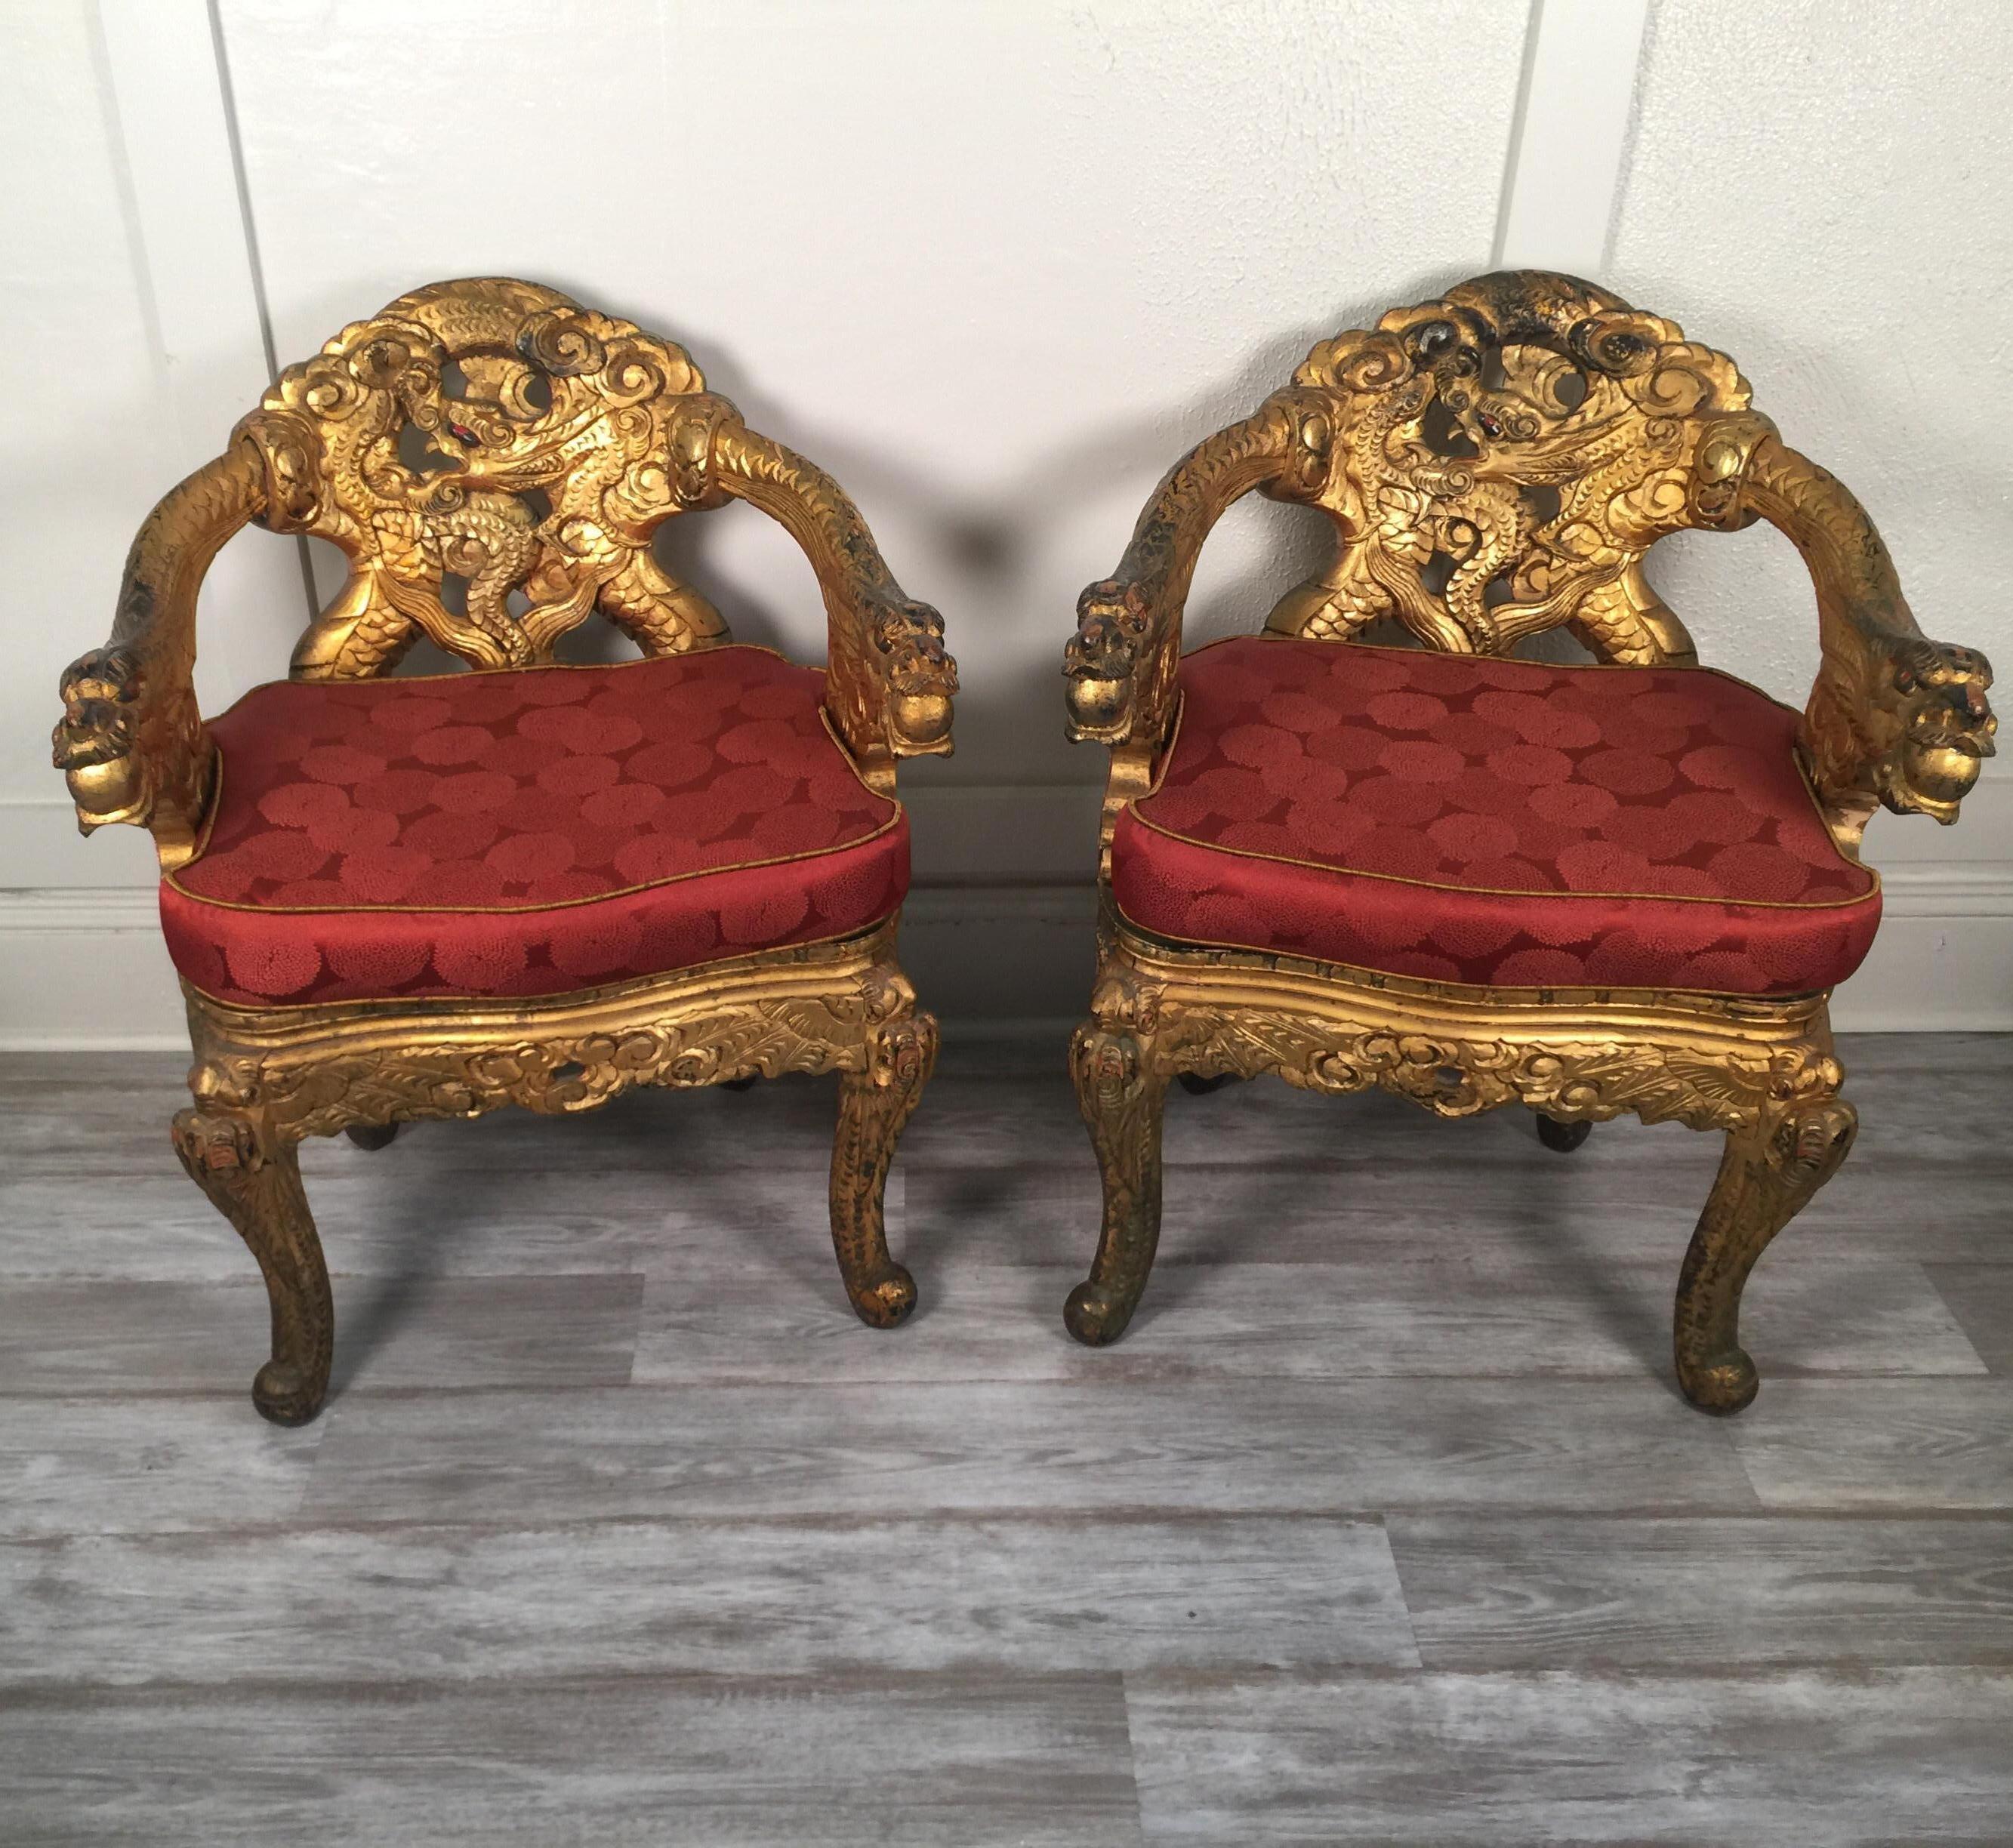 Pair of Hand Carved Gilt Japanese Chairs with Silk Cushions (Chinesischer Export)